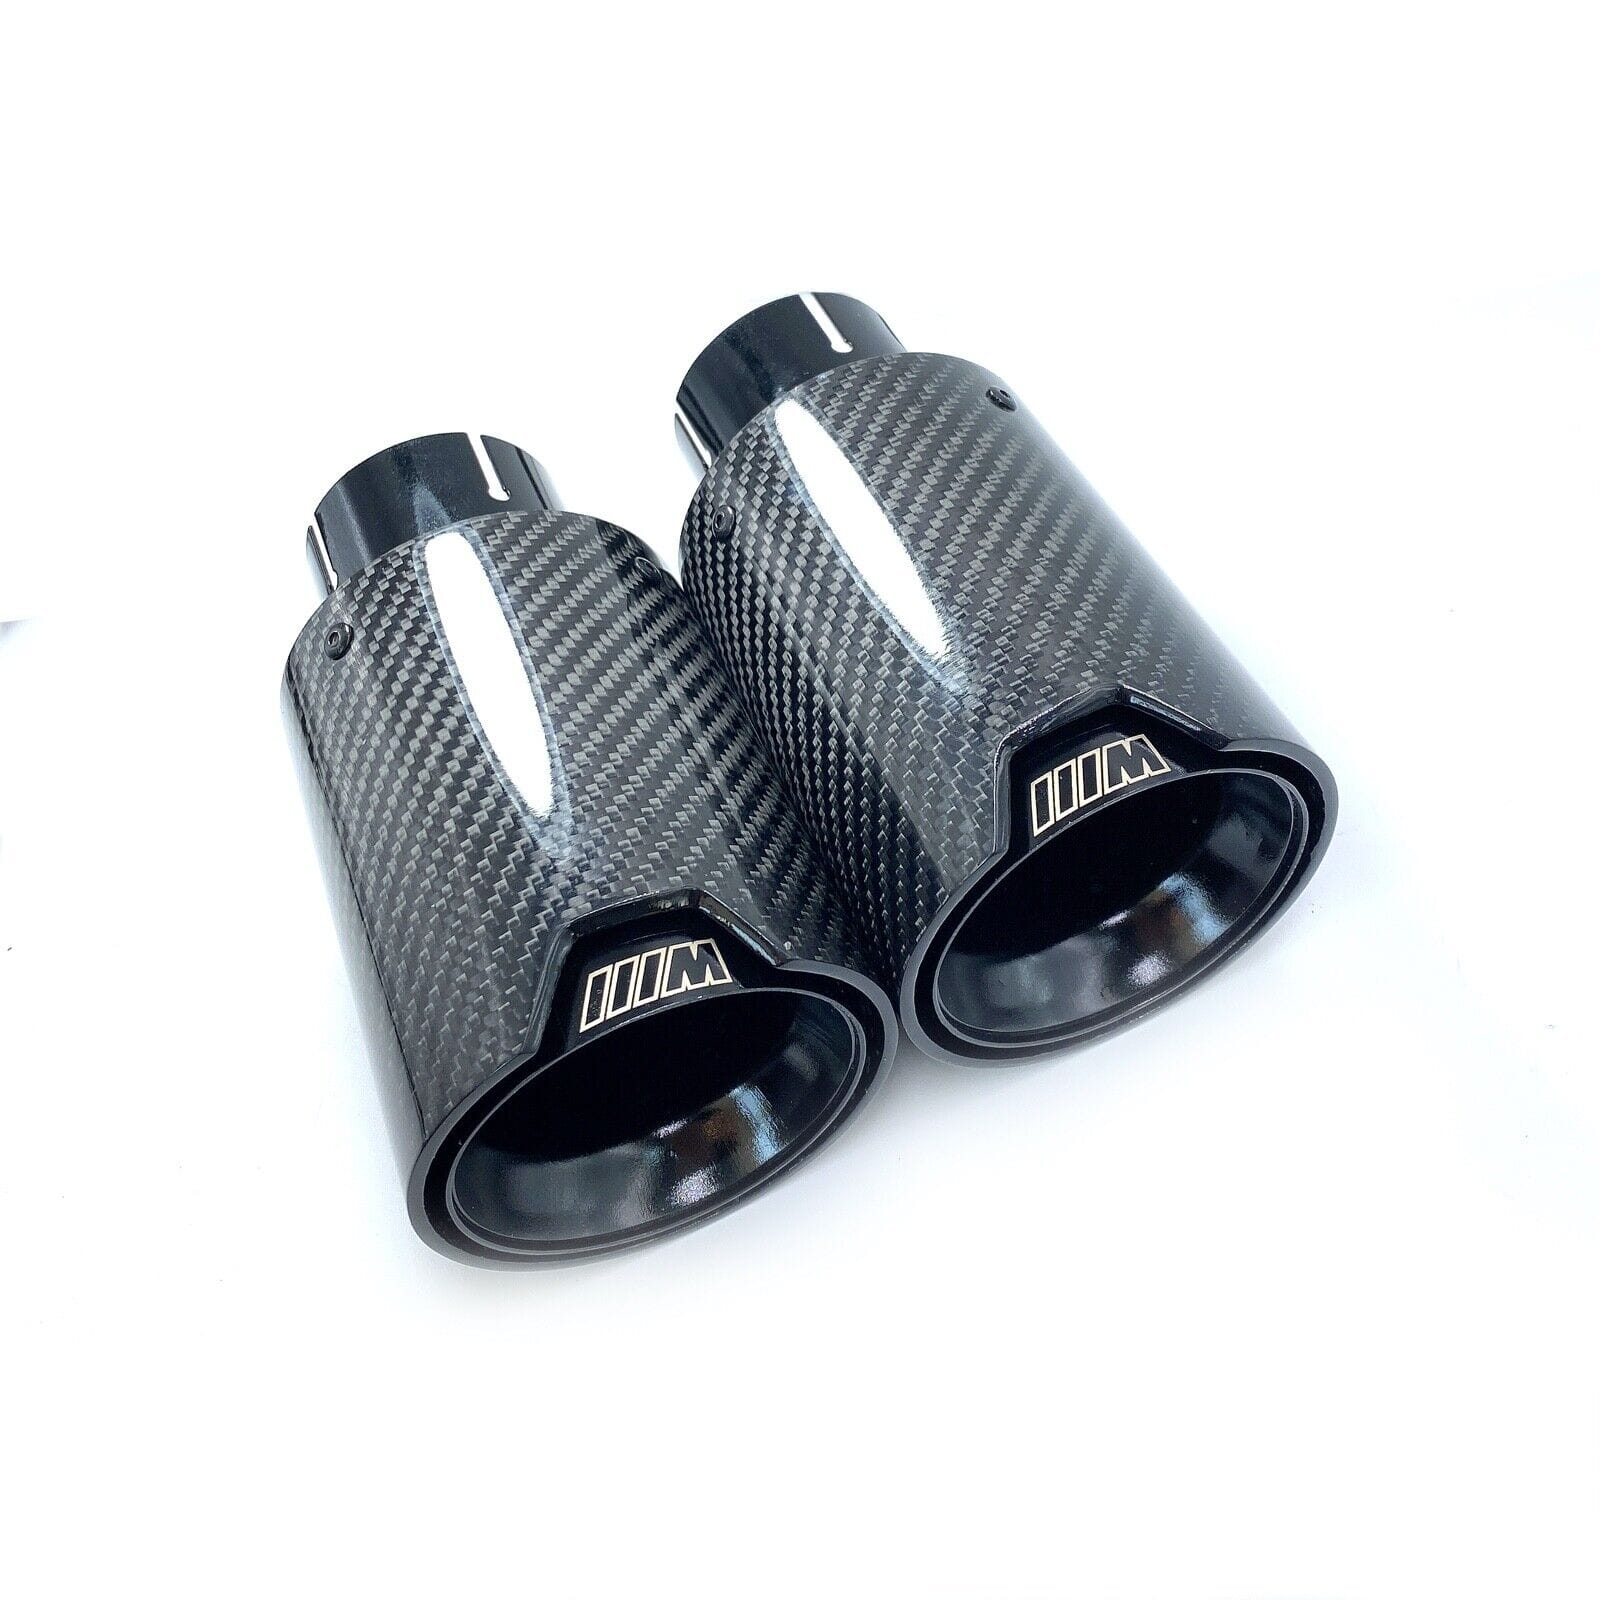 BMW 3 Series Aftermarket Carbon Fiber Parts and Accessories